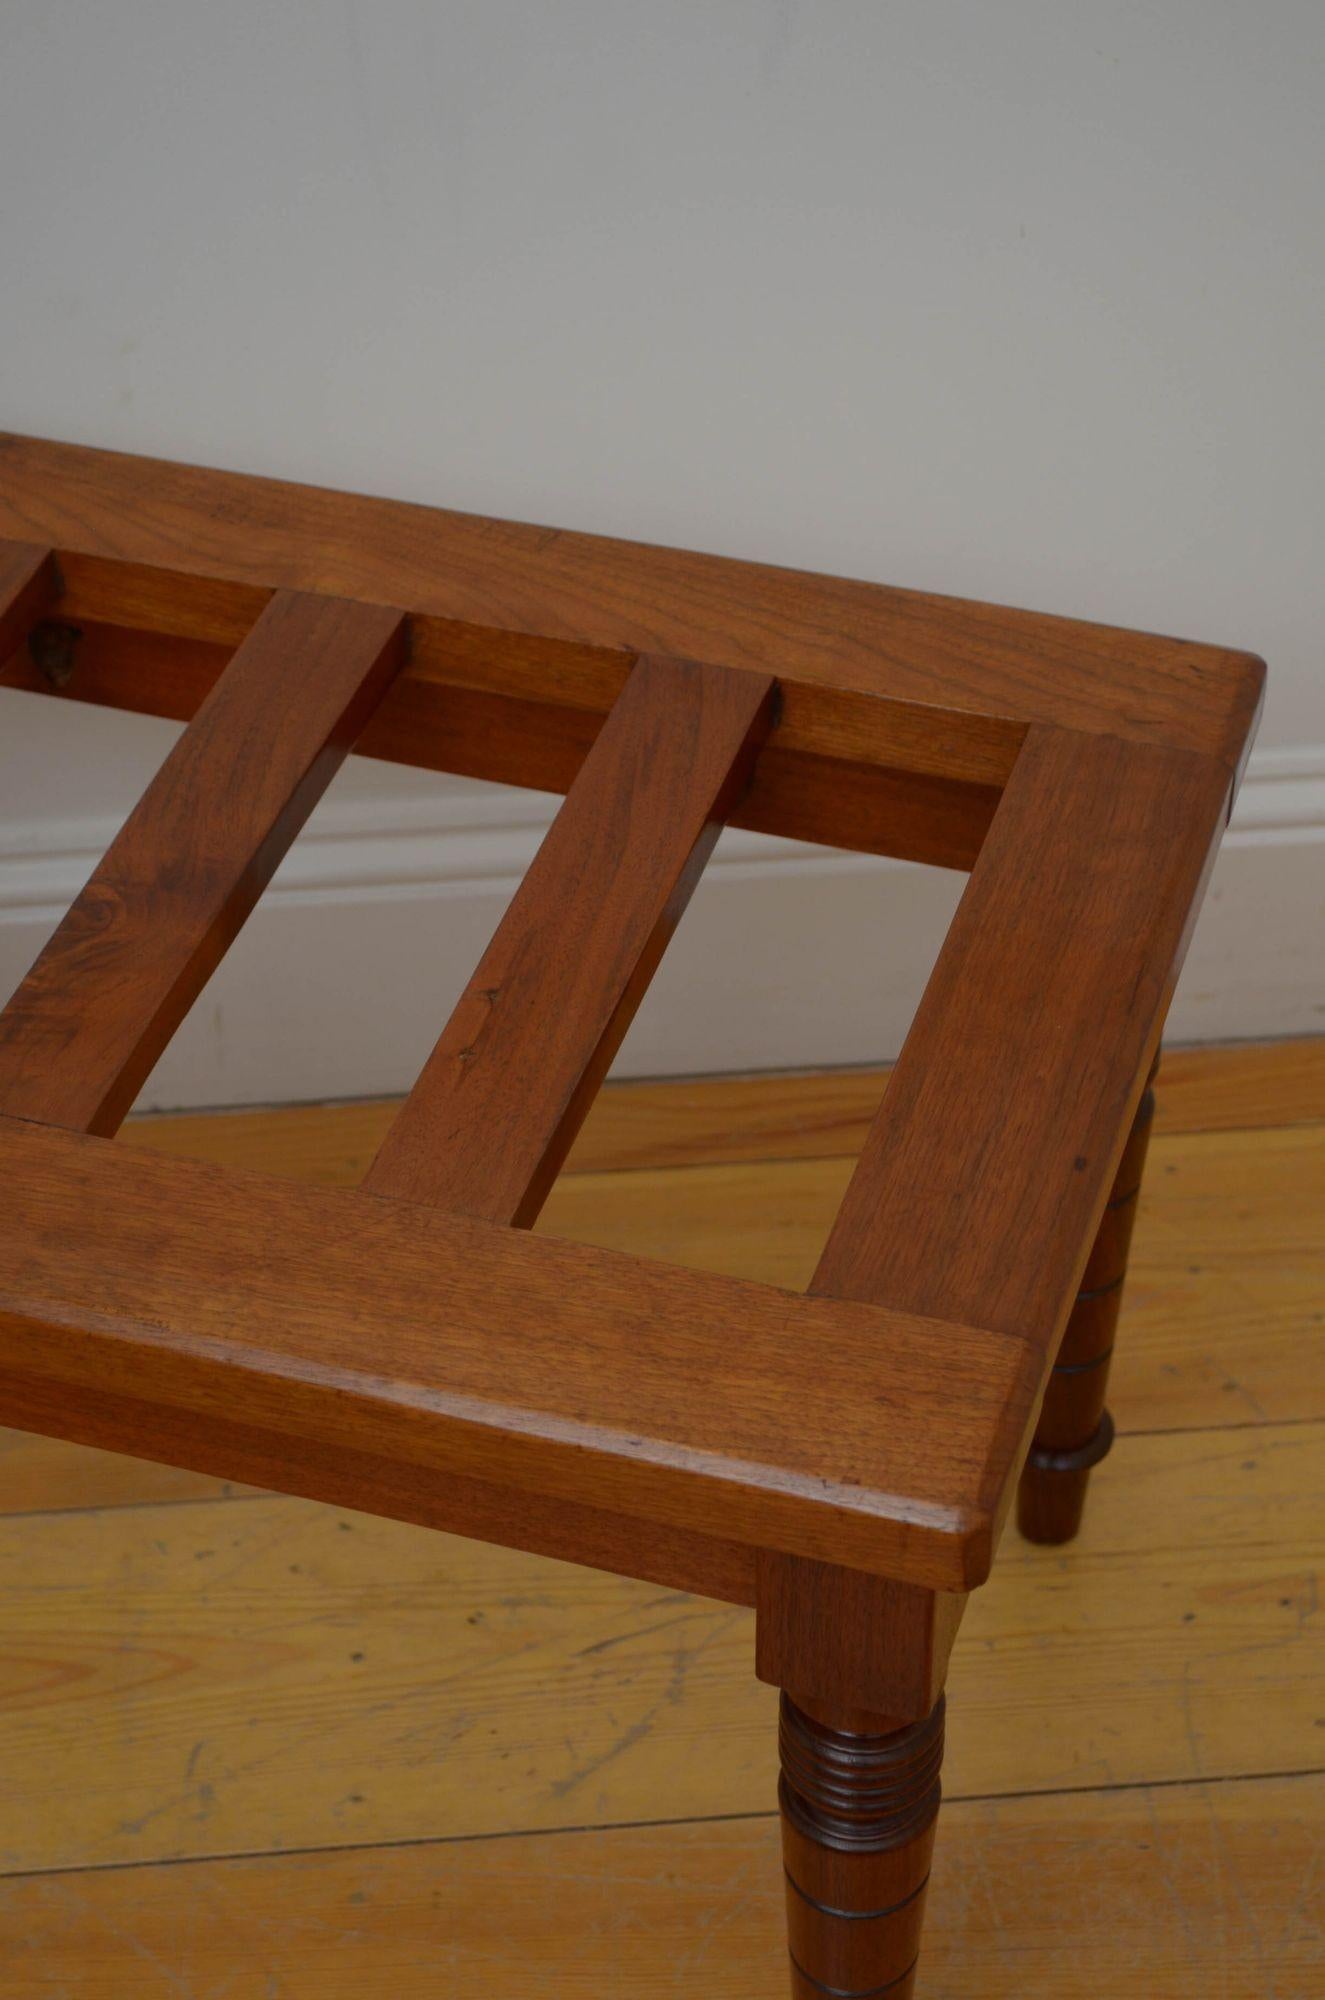 Victorian Solid Walnut Luggage Rack In Good Condition For Sale In Whaley Bridge, GB